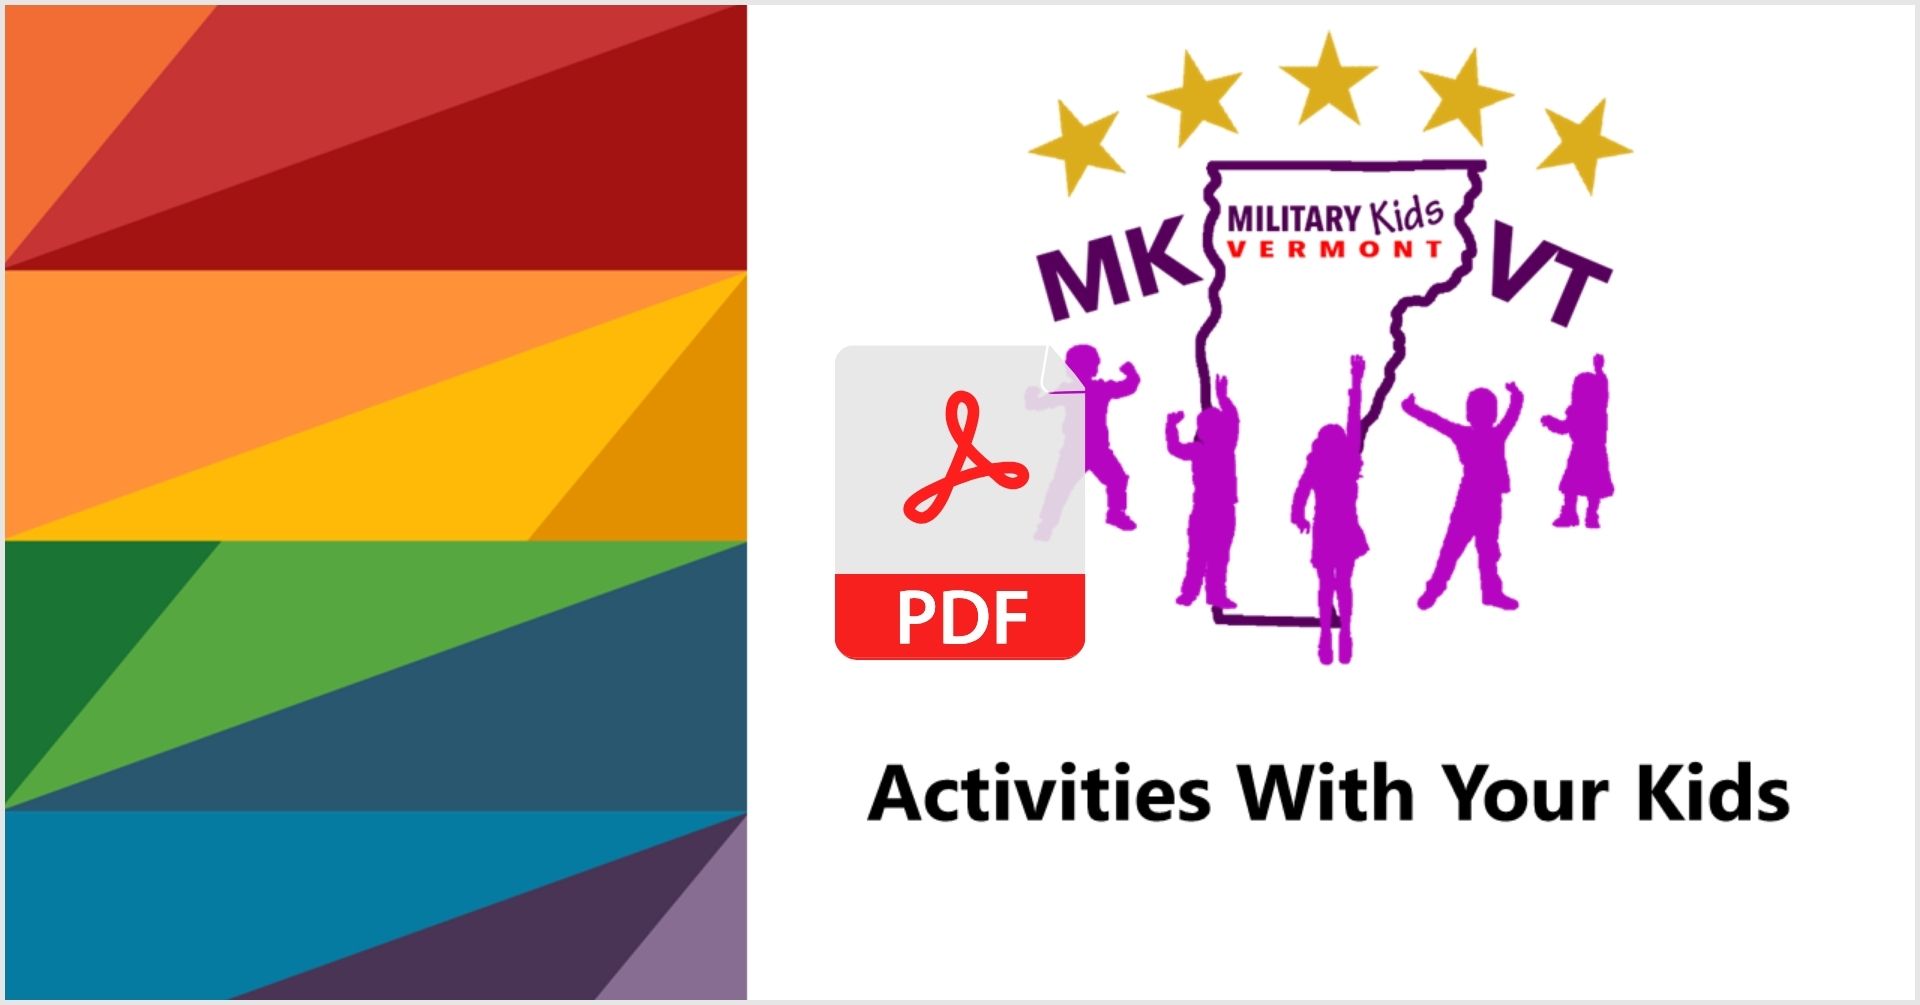 Kitchen spoons and combat boots | child and youth activities pdf